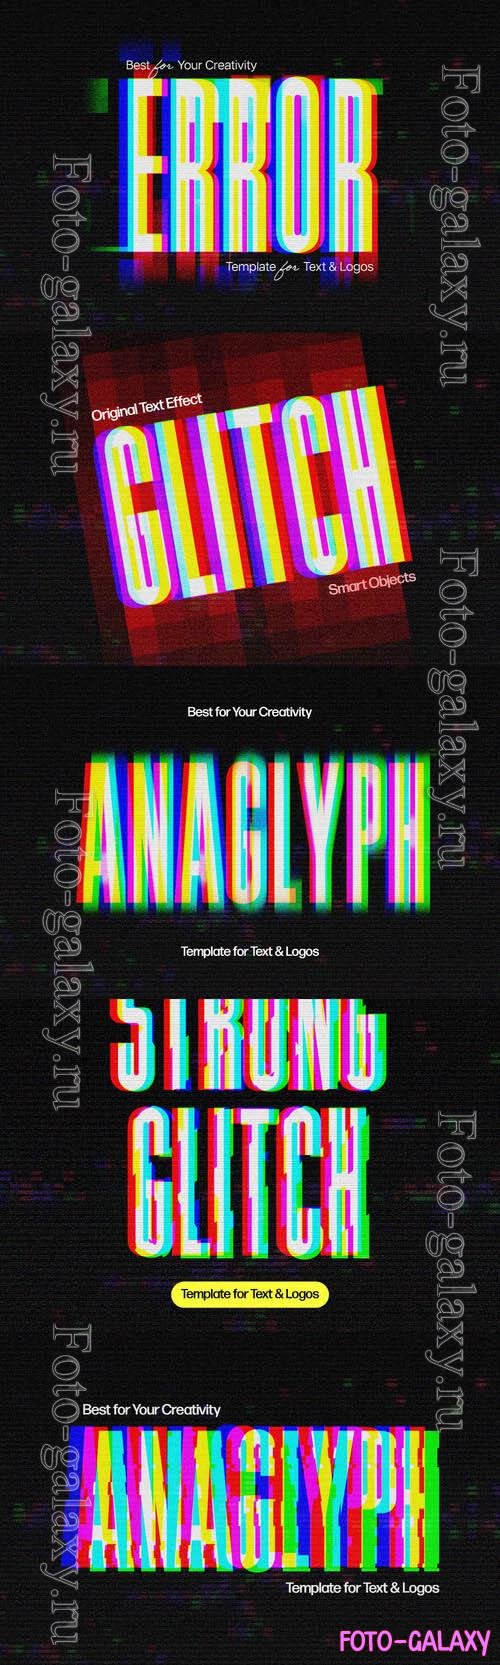 PSD error, anaglyph, hacker, strong, vibrant, glitch text effect